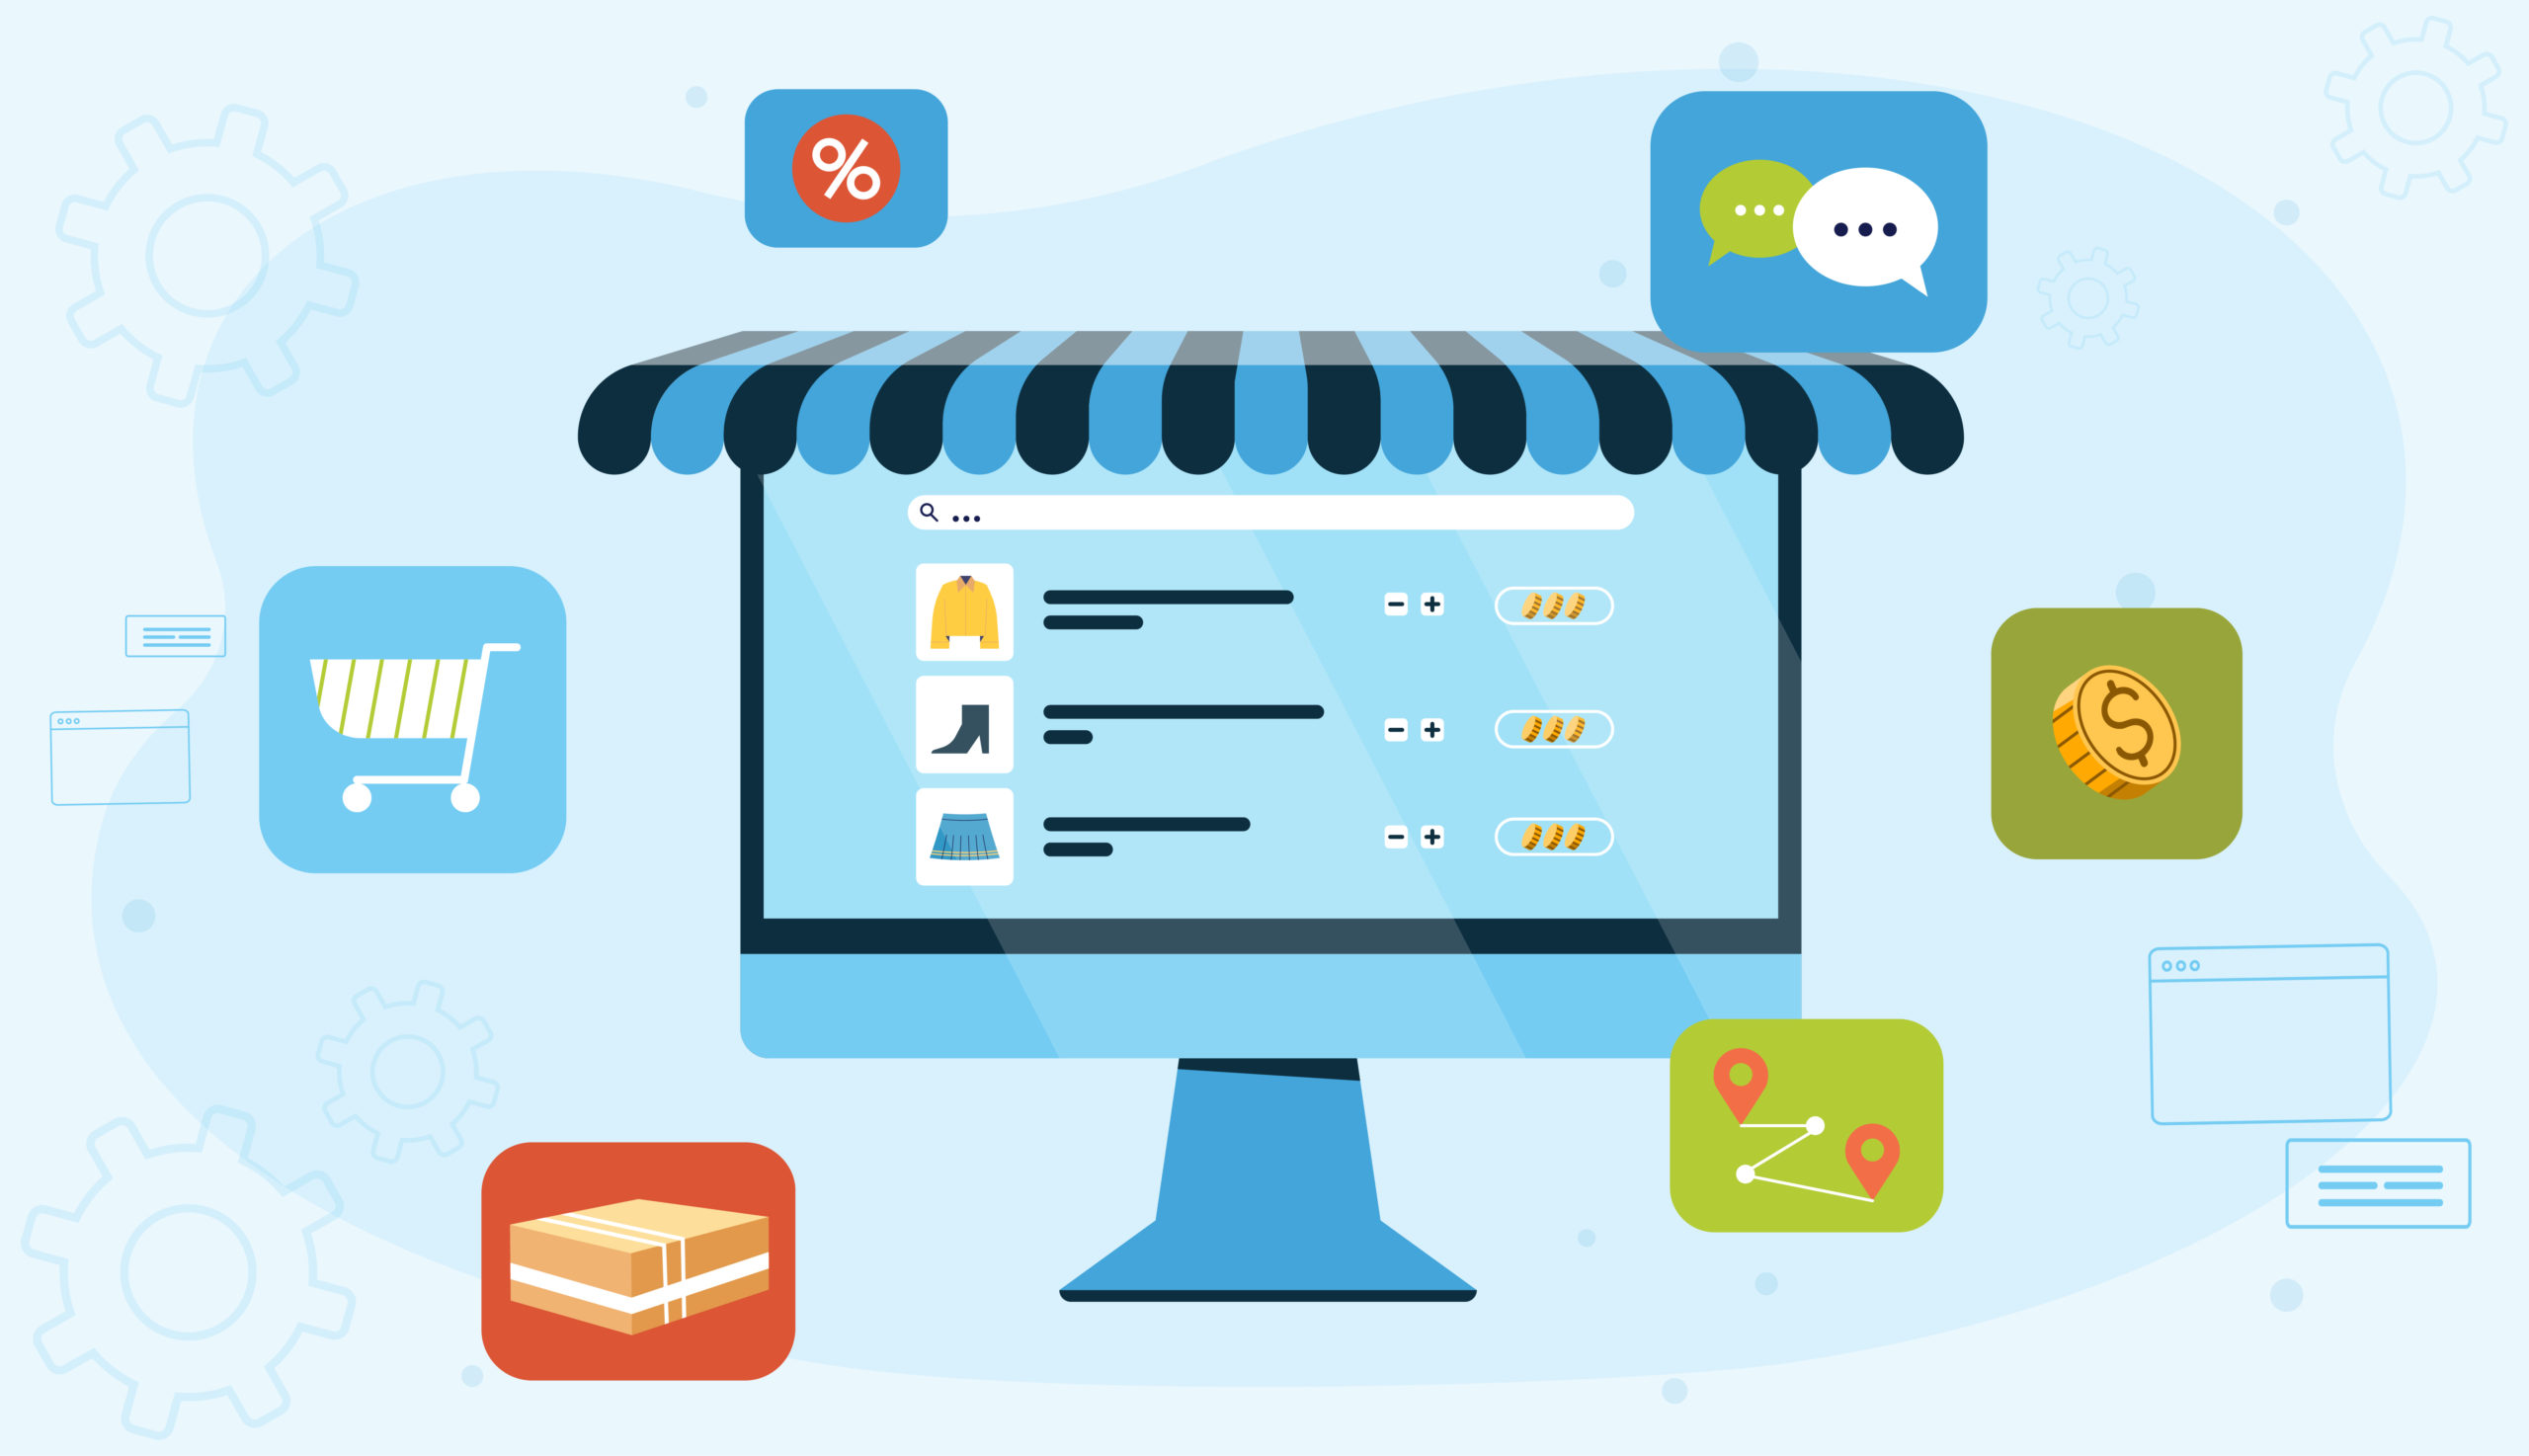 AdAction's Guide to Marketing Your Shopping App